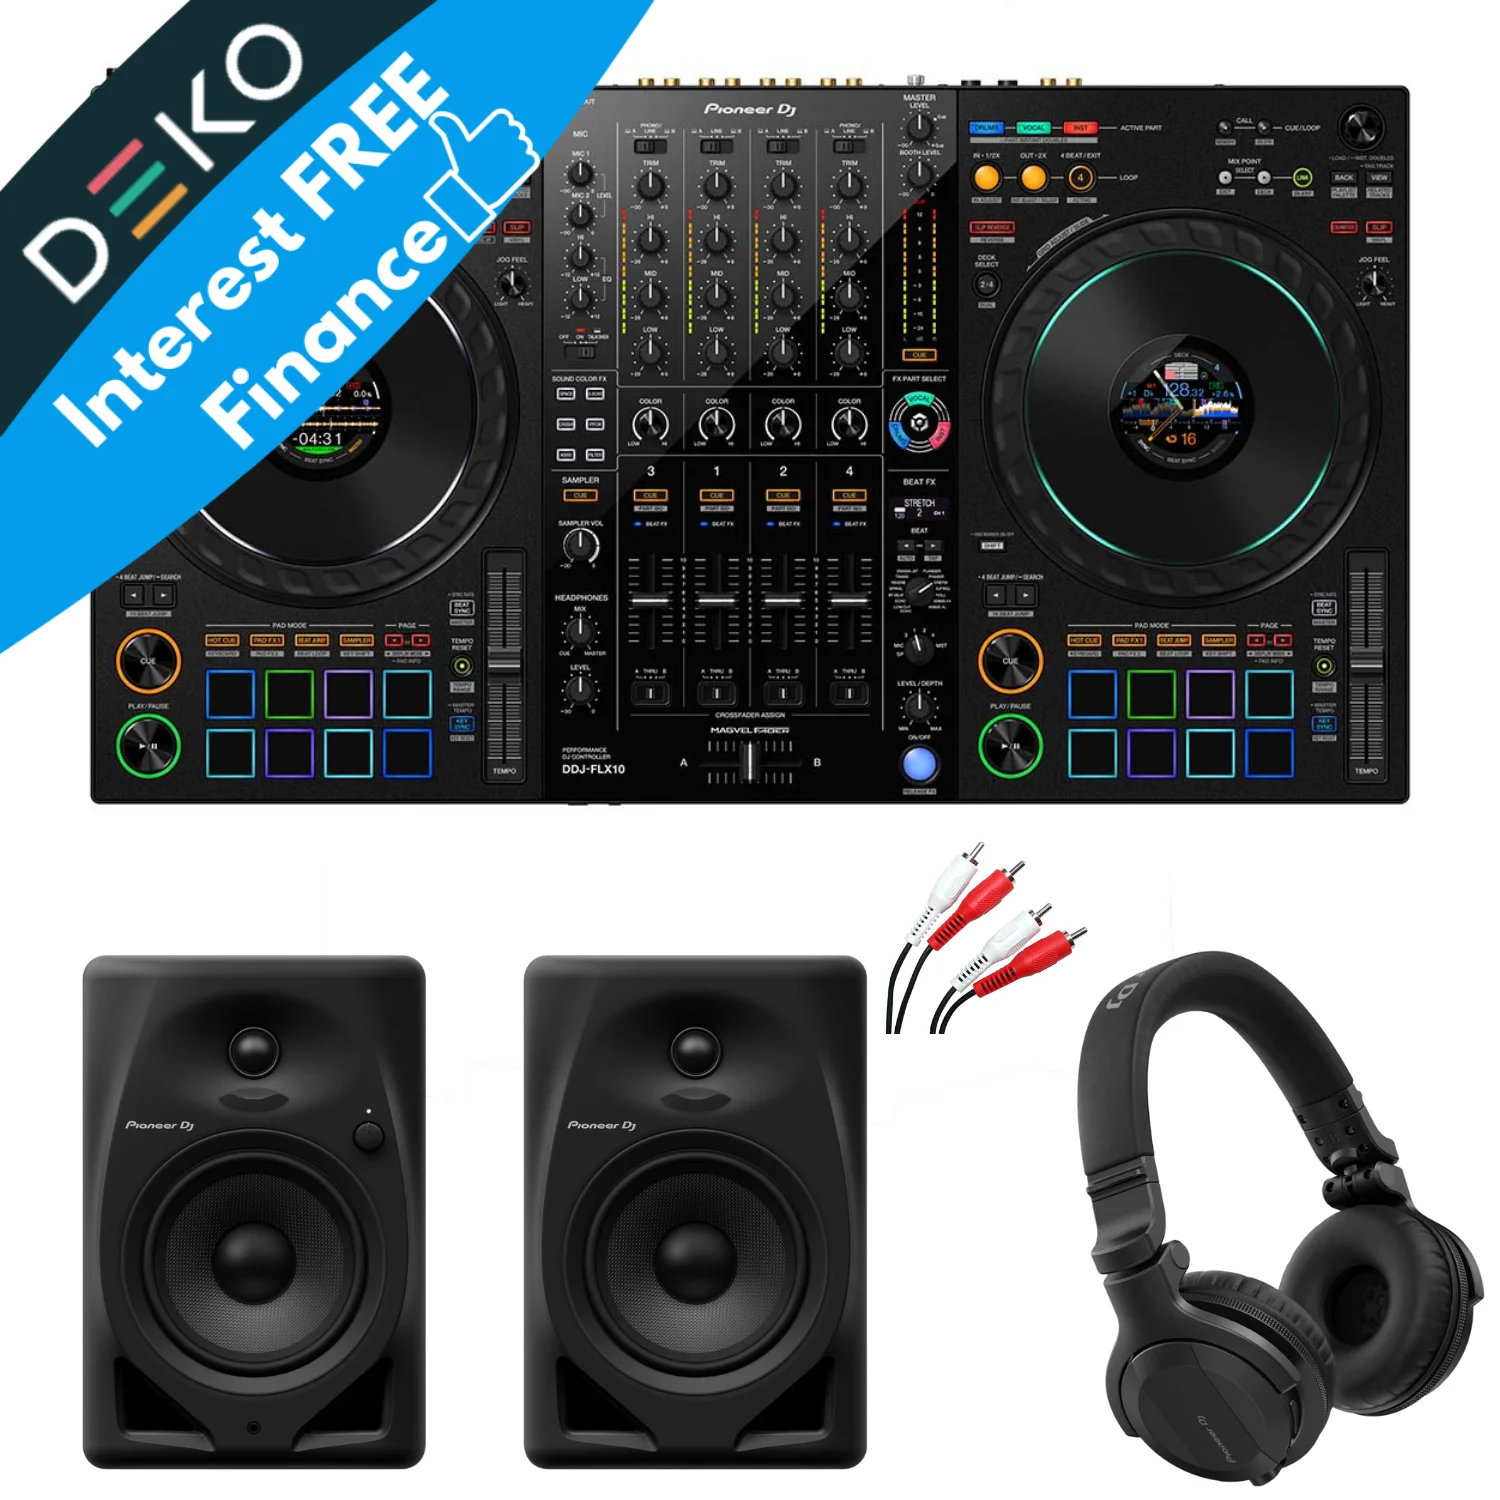 Introducing the DM-50-BT & DM-40-BT from Pioneer DJ, bringing Bluetooth  connectivity to the studio.